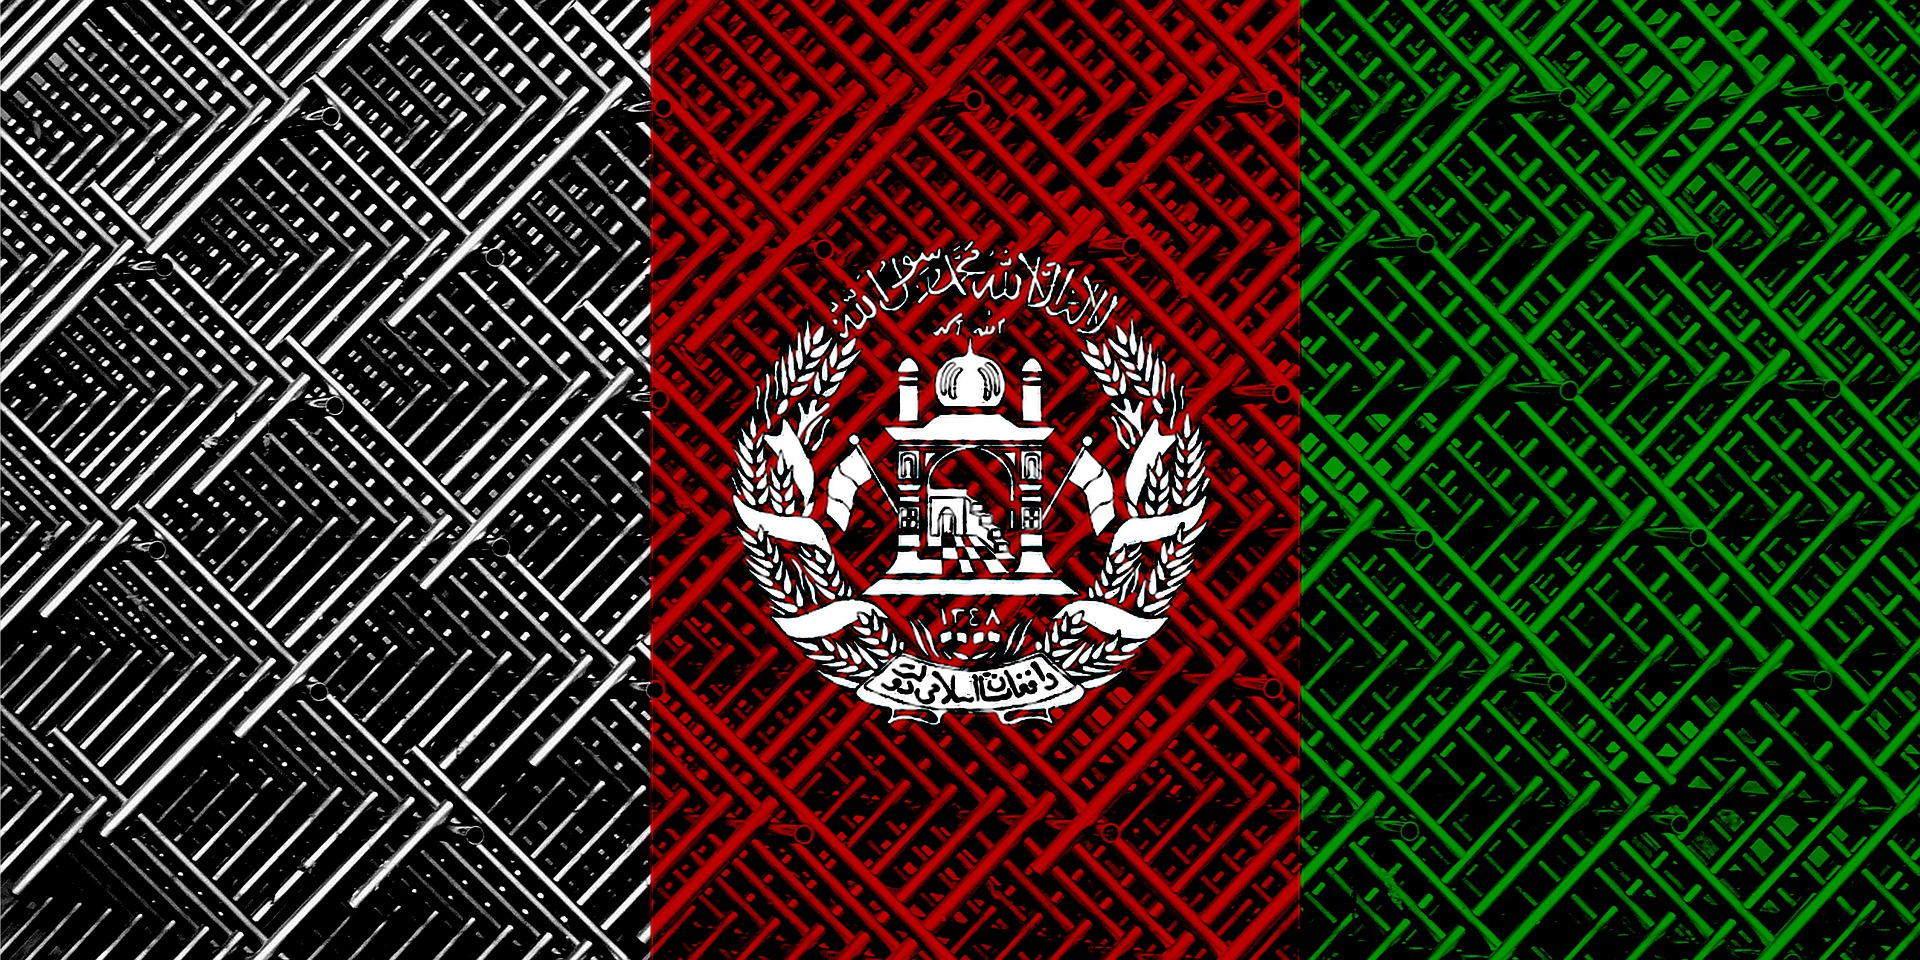 Badkadi - The have replaced the 🇦🇫 with their own flag on